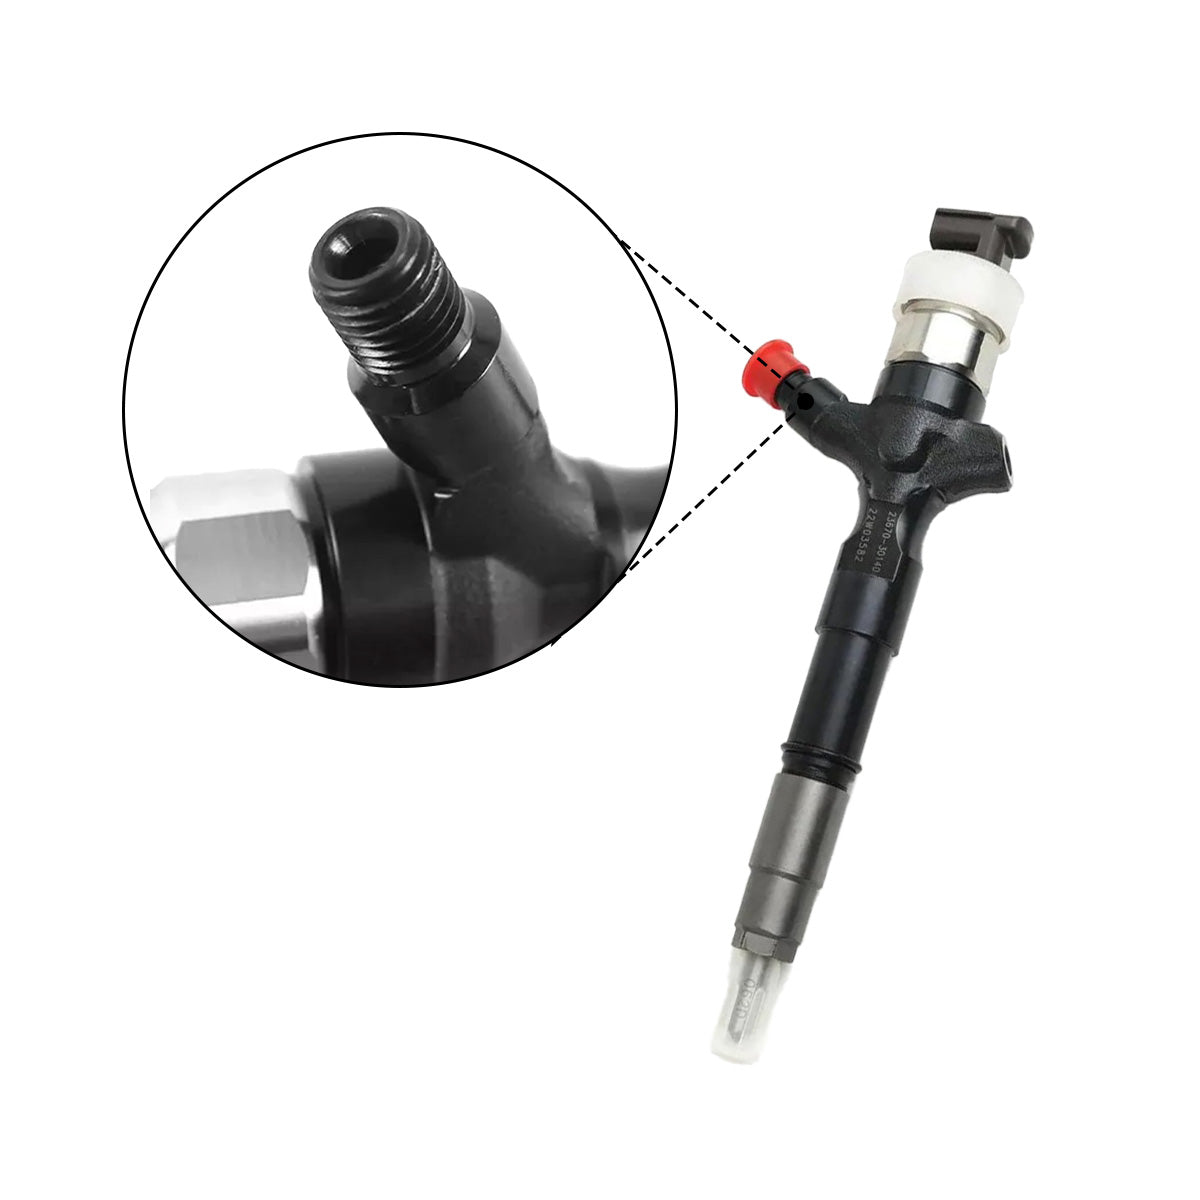 Denso Common Rail Fuel Injector 23670-30140 for Toyota Hilux 1KD-FTV Engine - Sinocmp